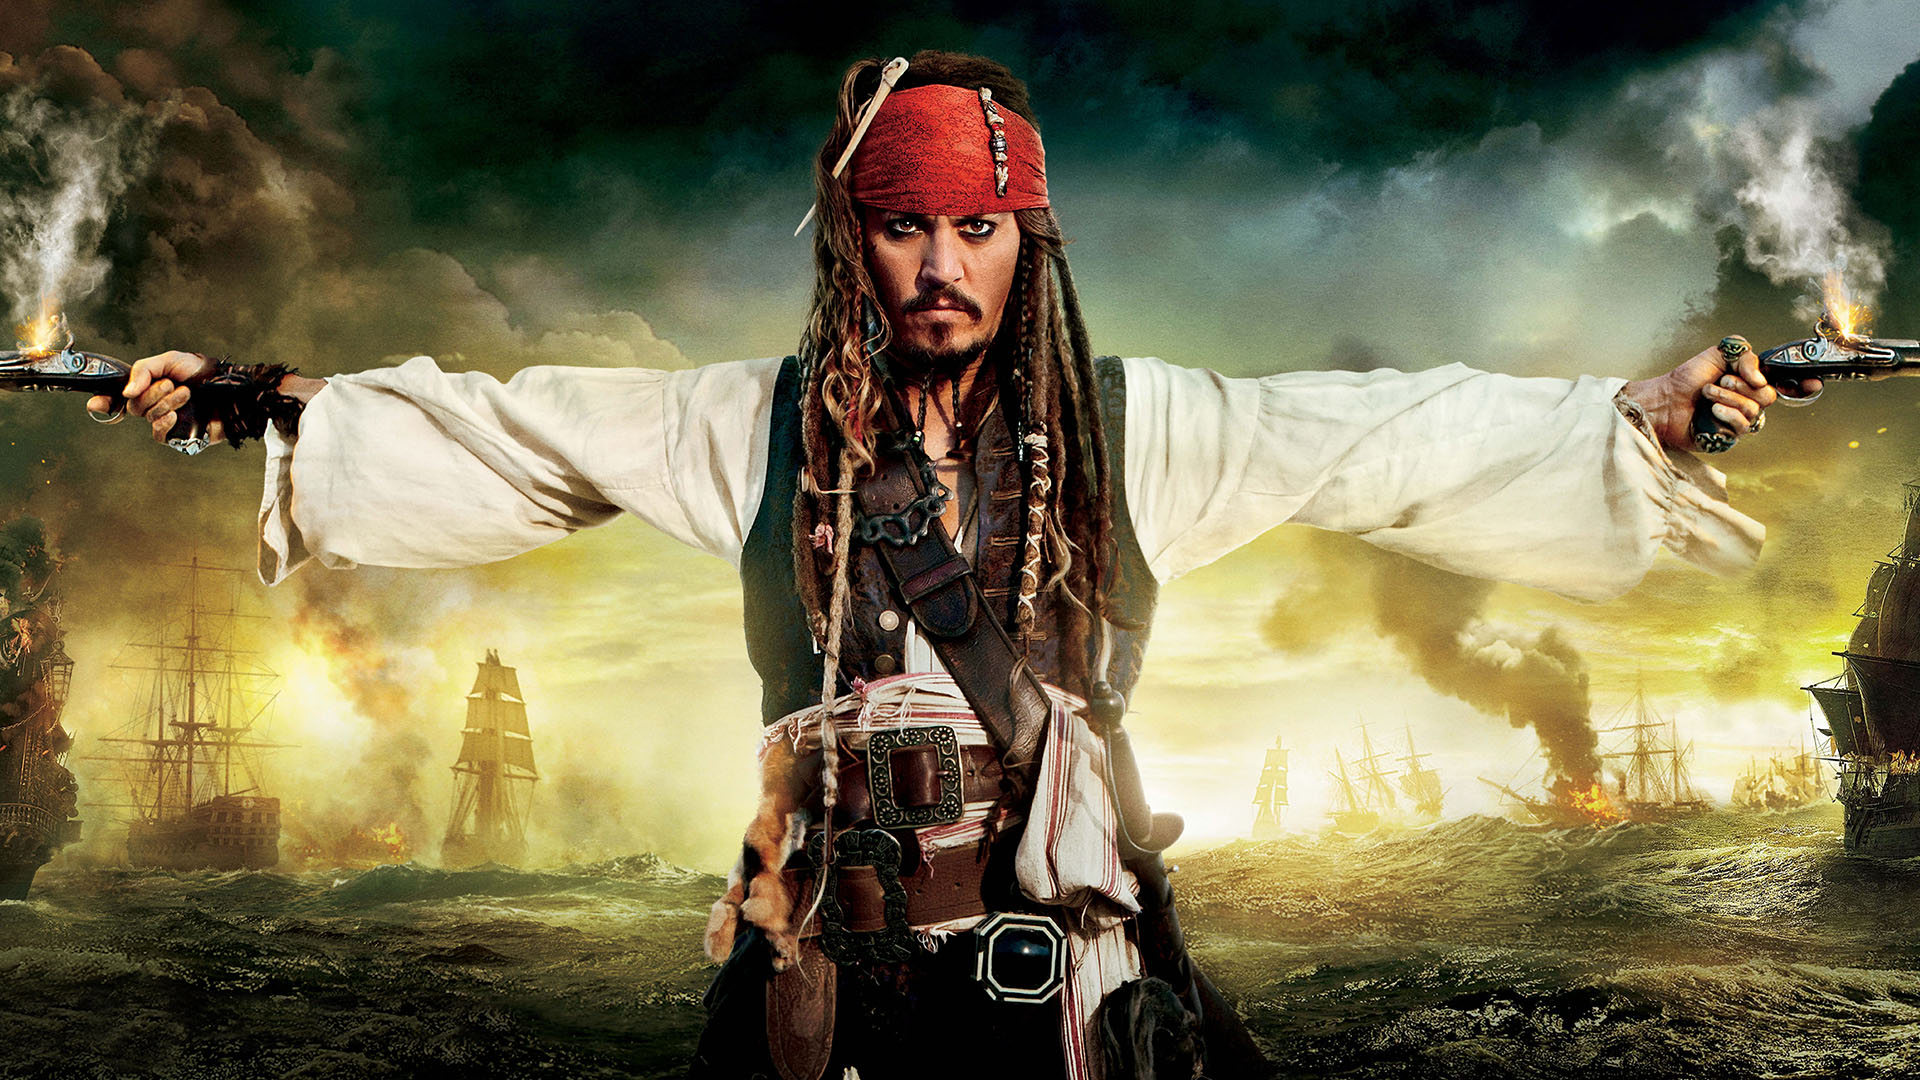 pirates of the caribbean 1 full movie download